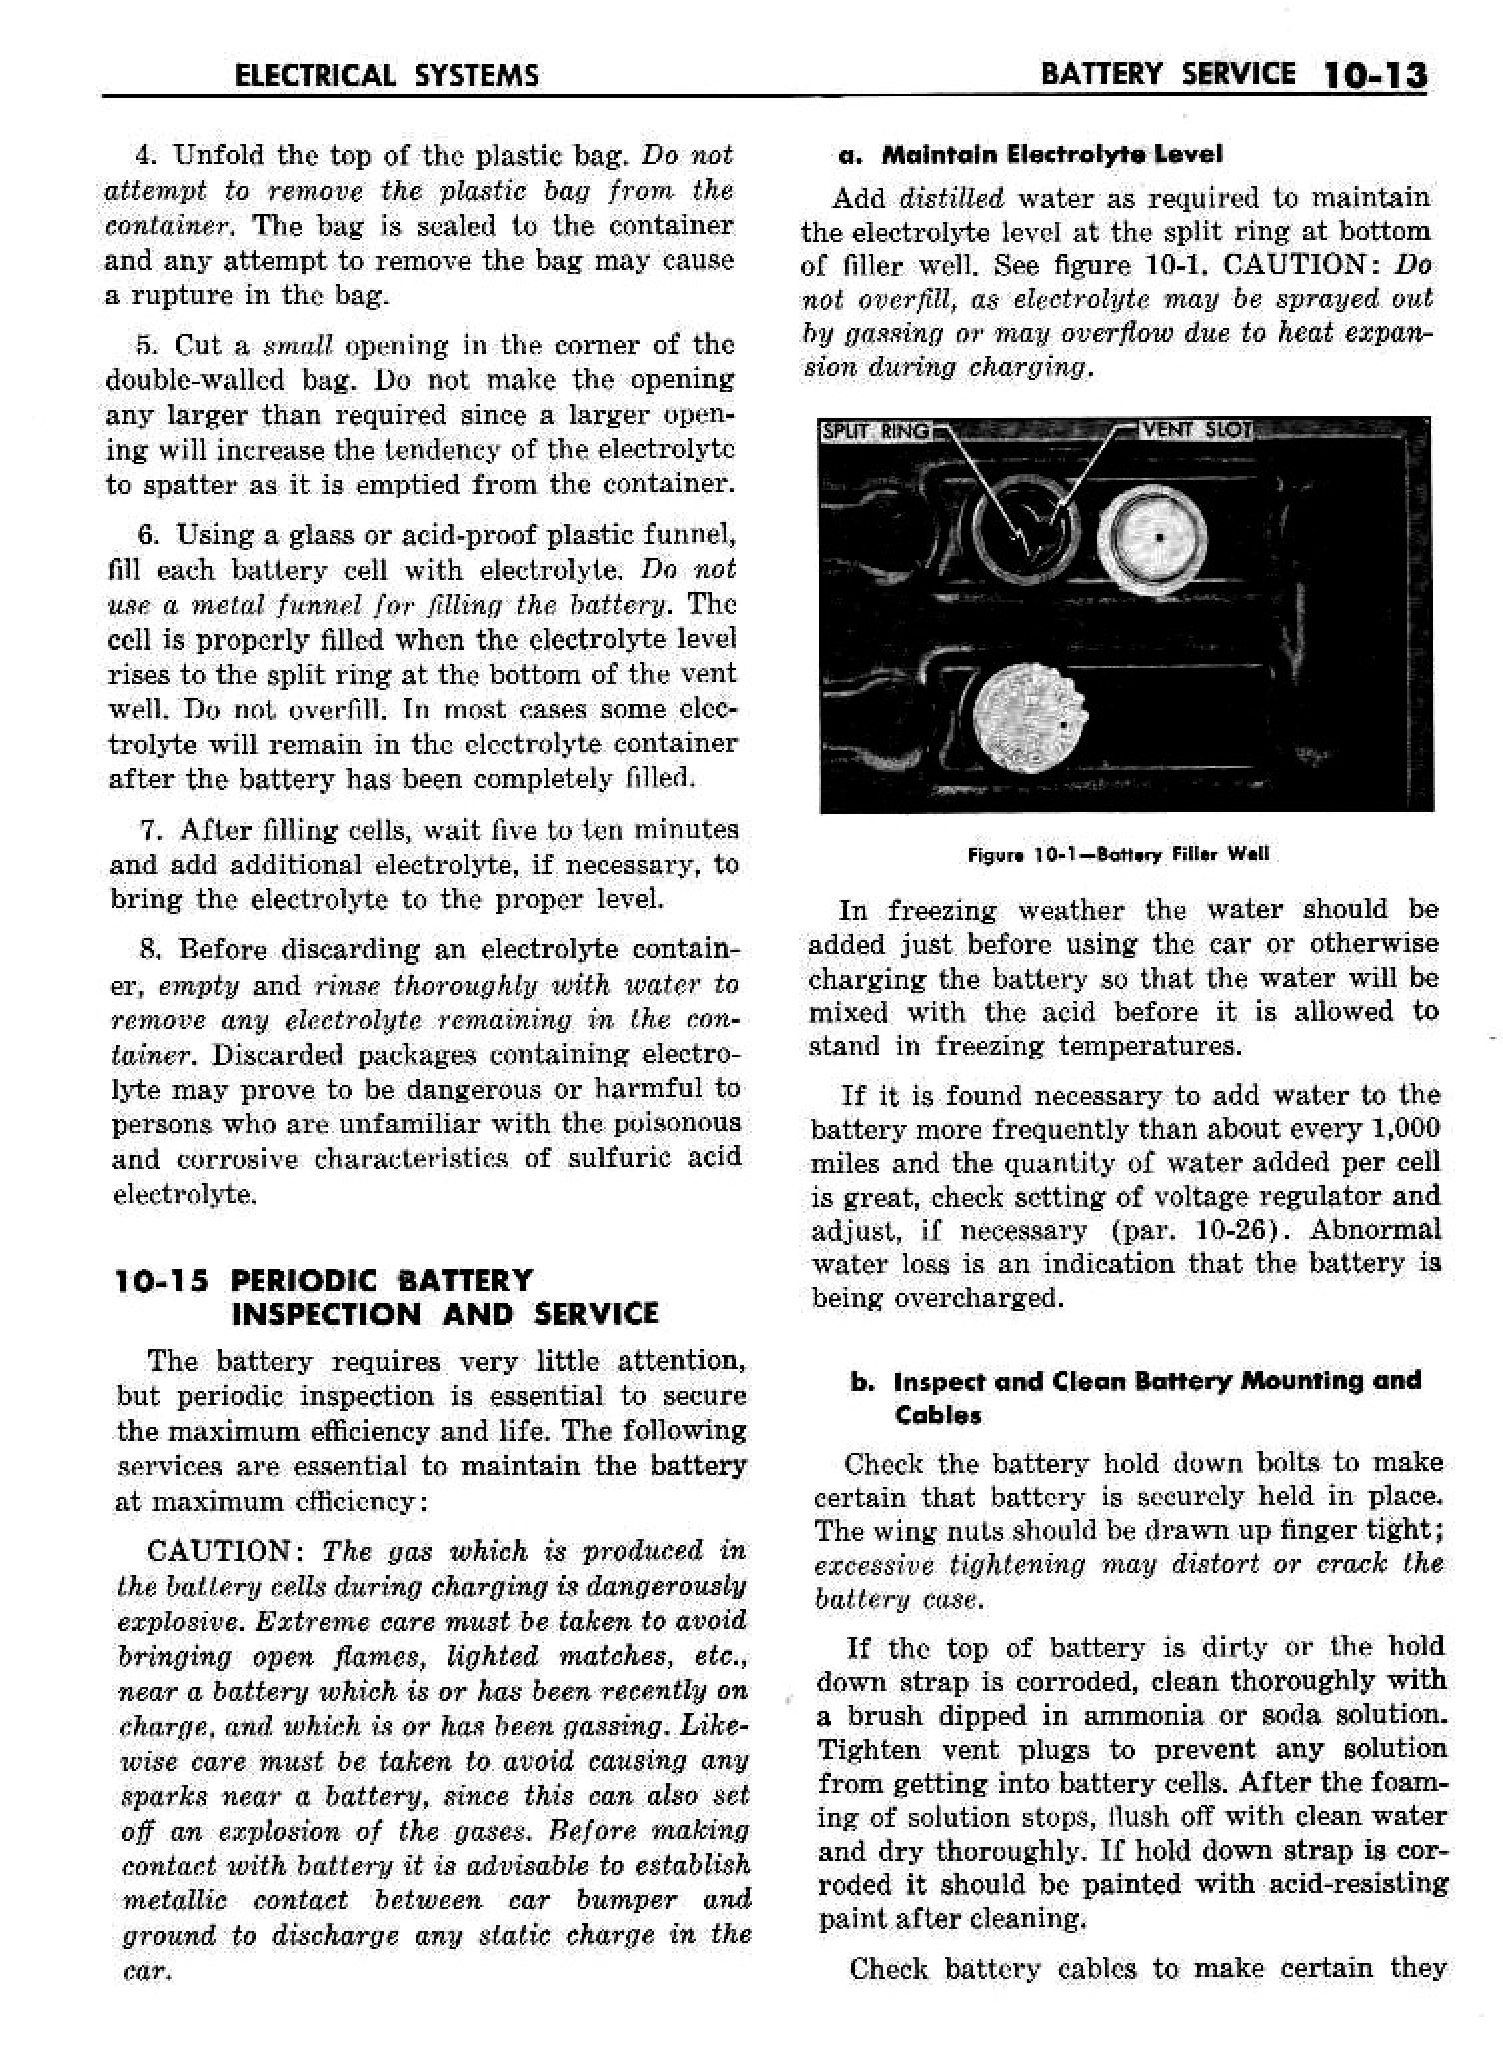 n_11 1958 Buick Shop Manual - Electrical Systems_13.jpg